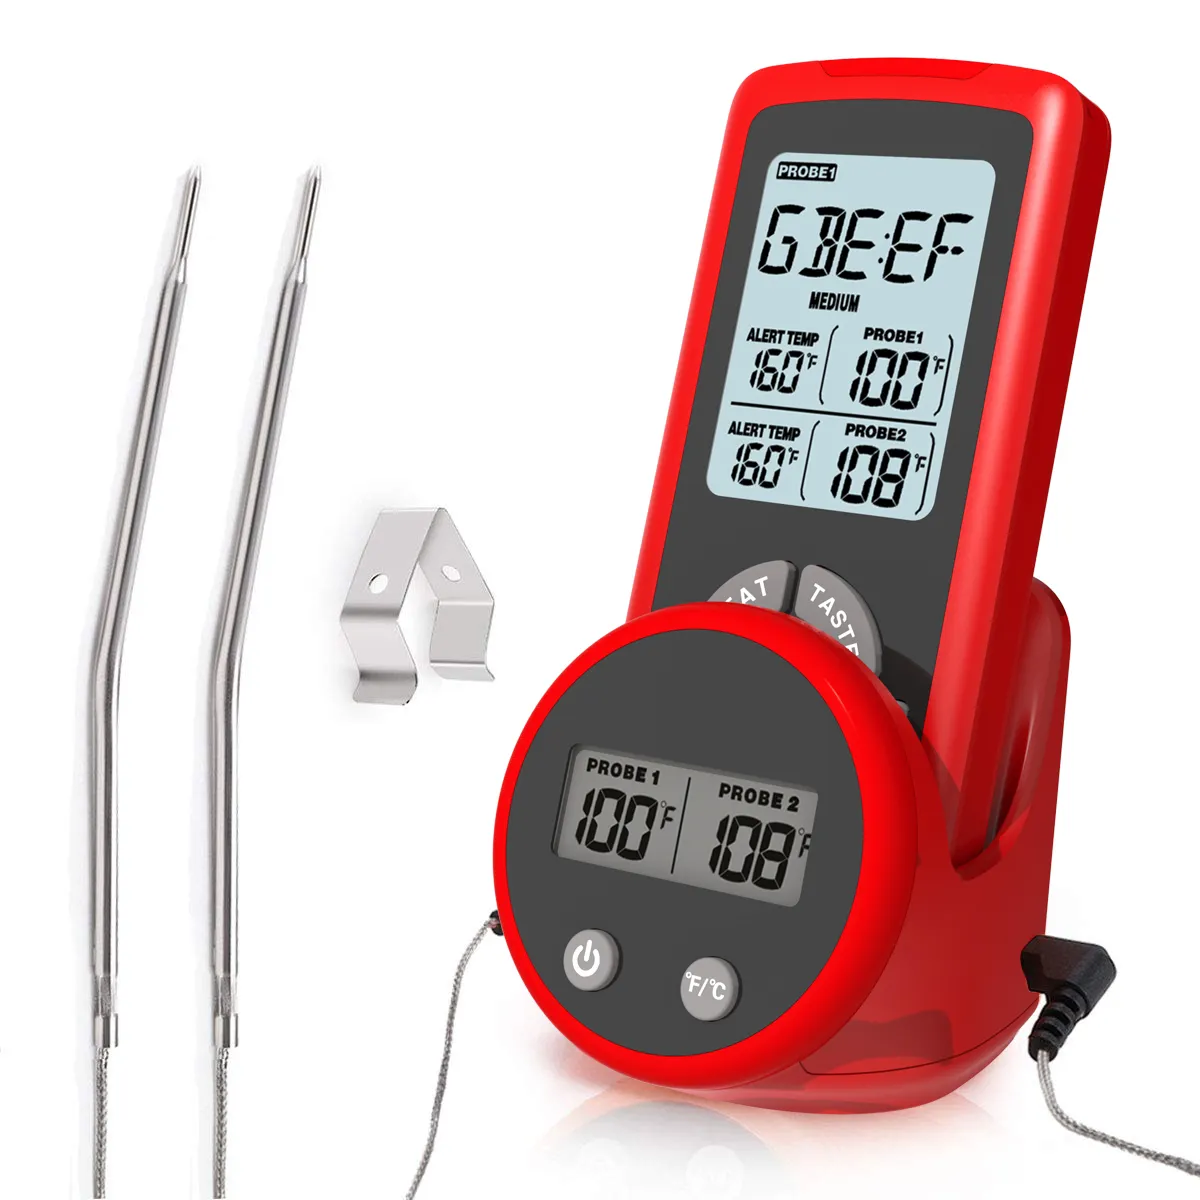 Hot Selling Wireless Cooking Meat Thermometer Digital Food Thermometer with Timer, Alarm Temperature, Dual Probes